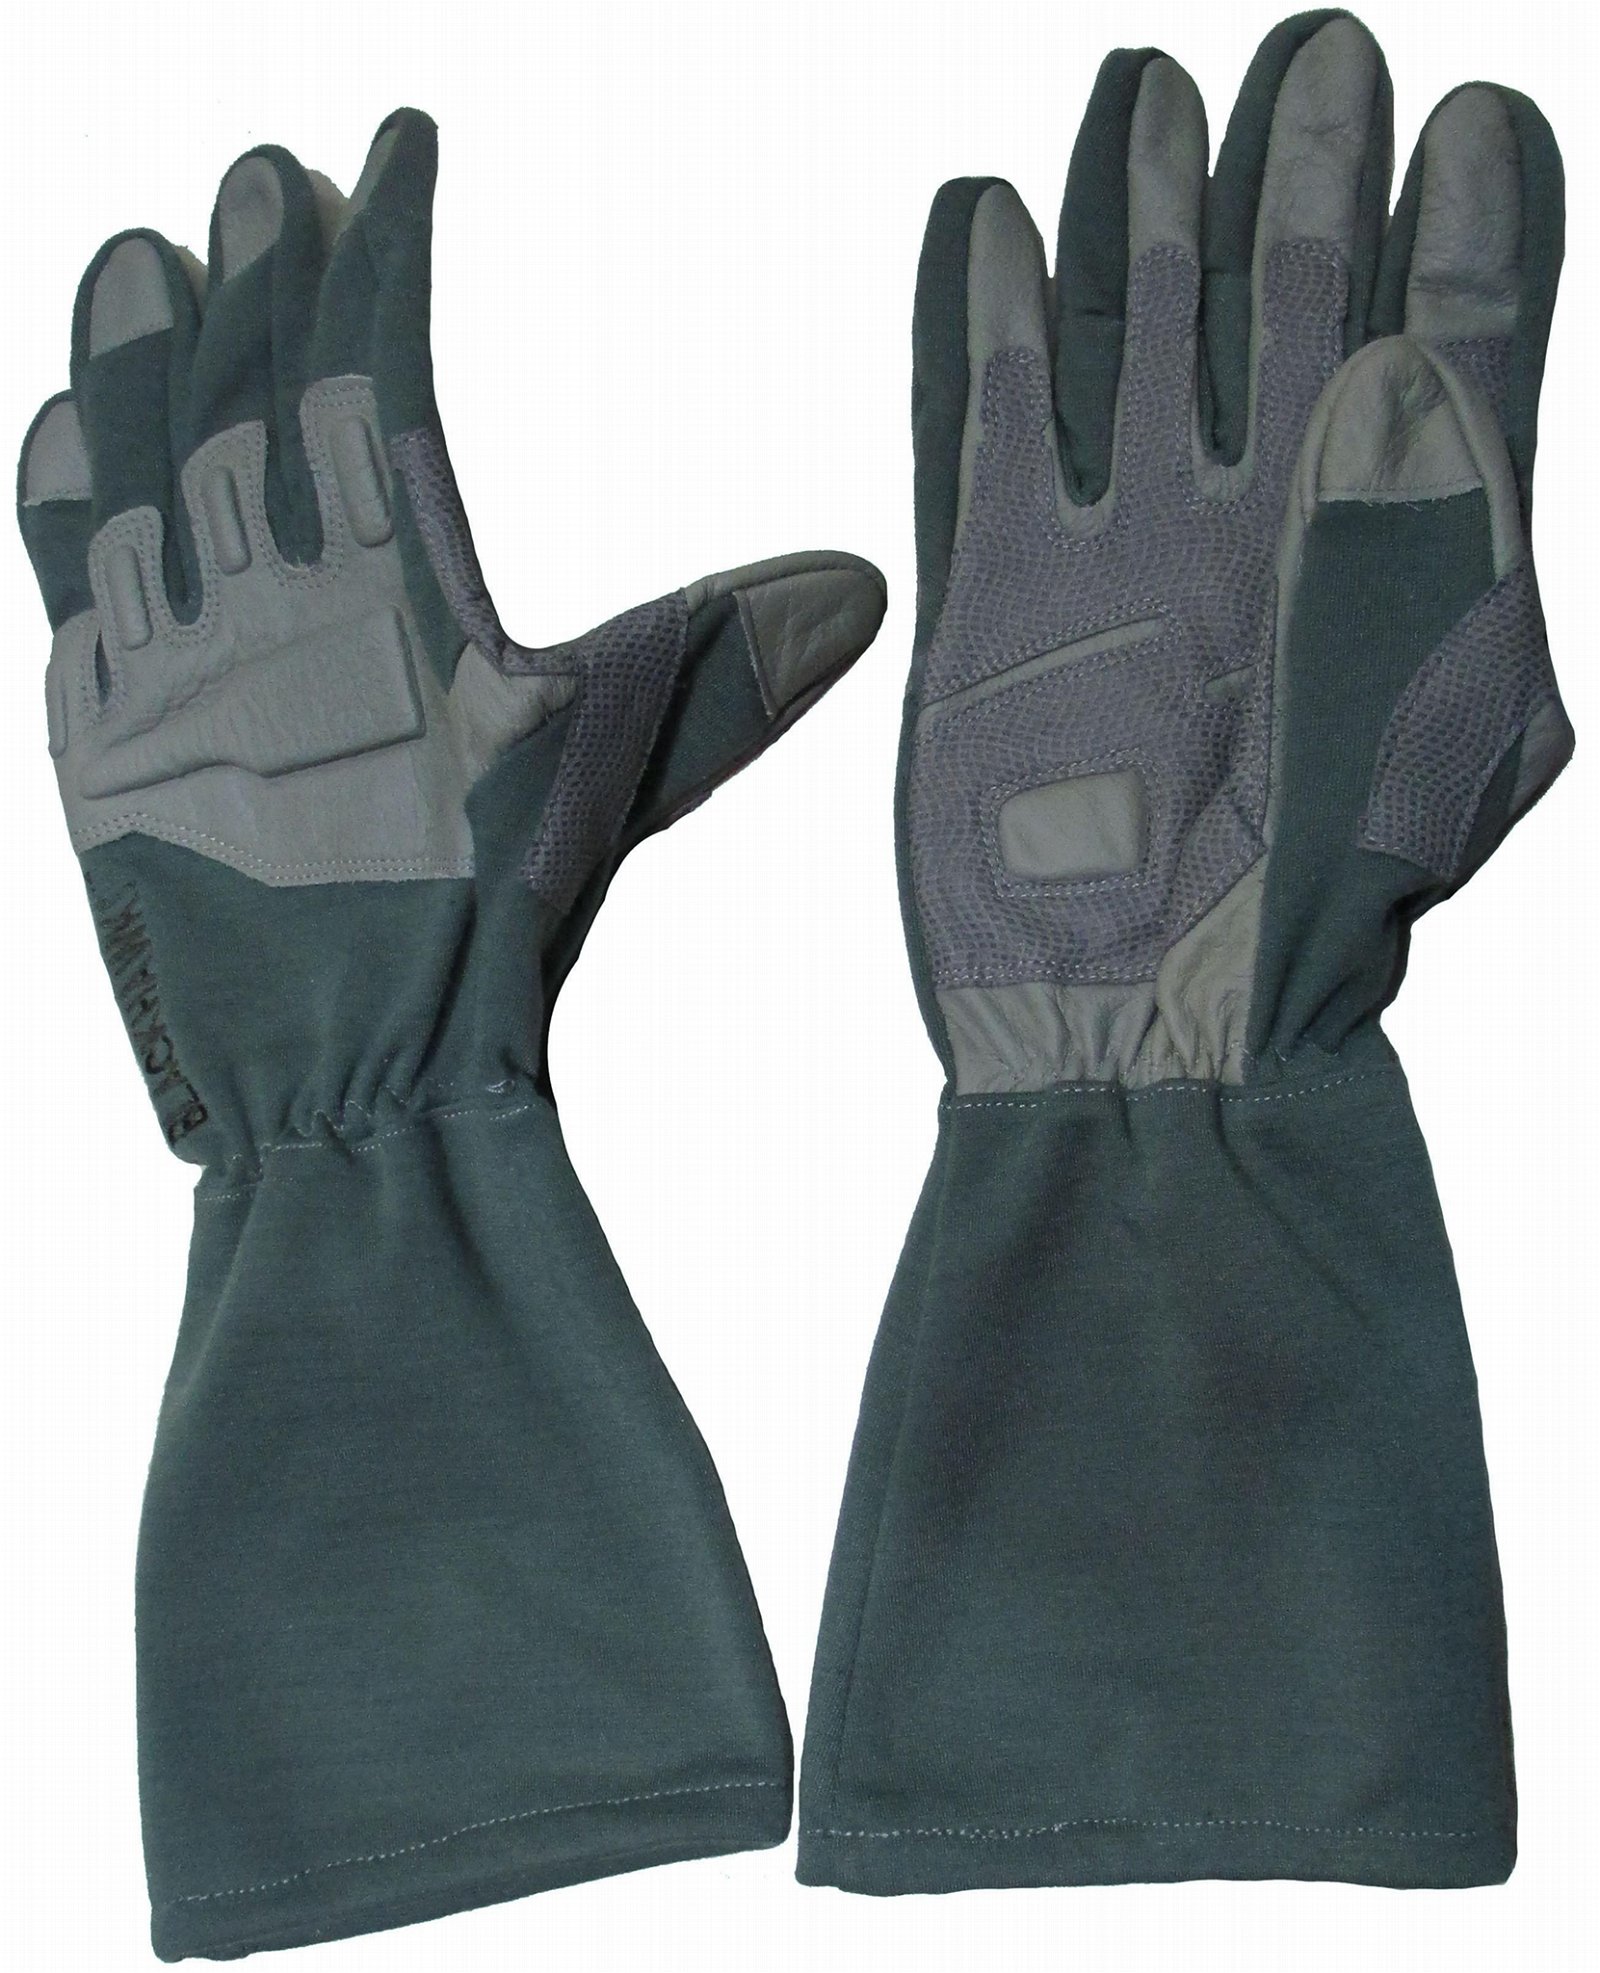 GP-TG0010 SPECIAL OPERATIONS Tactical Suede Gloves BLK 